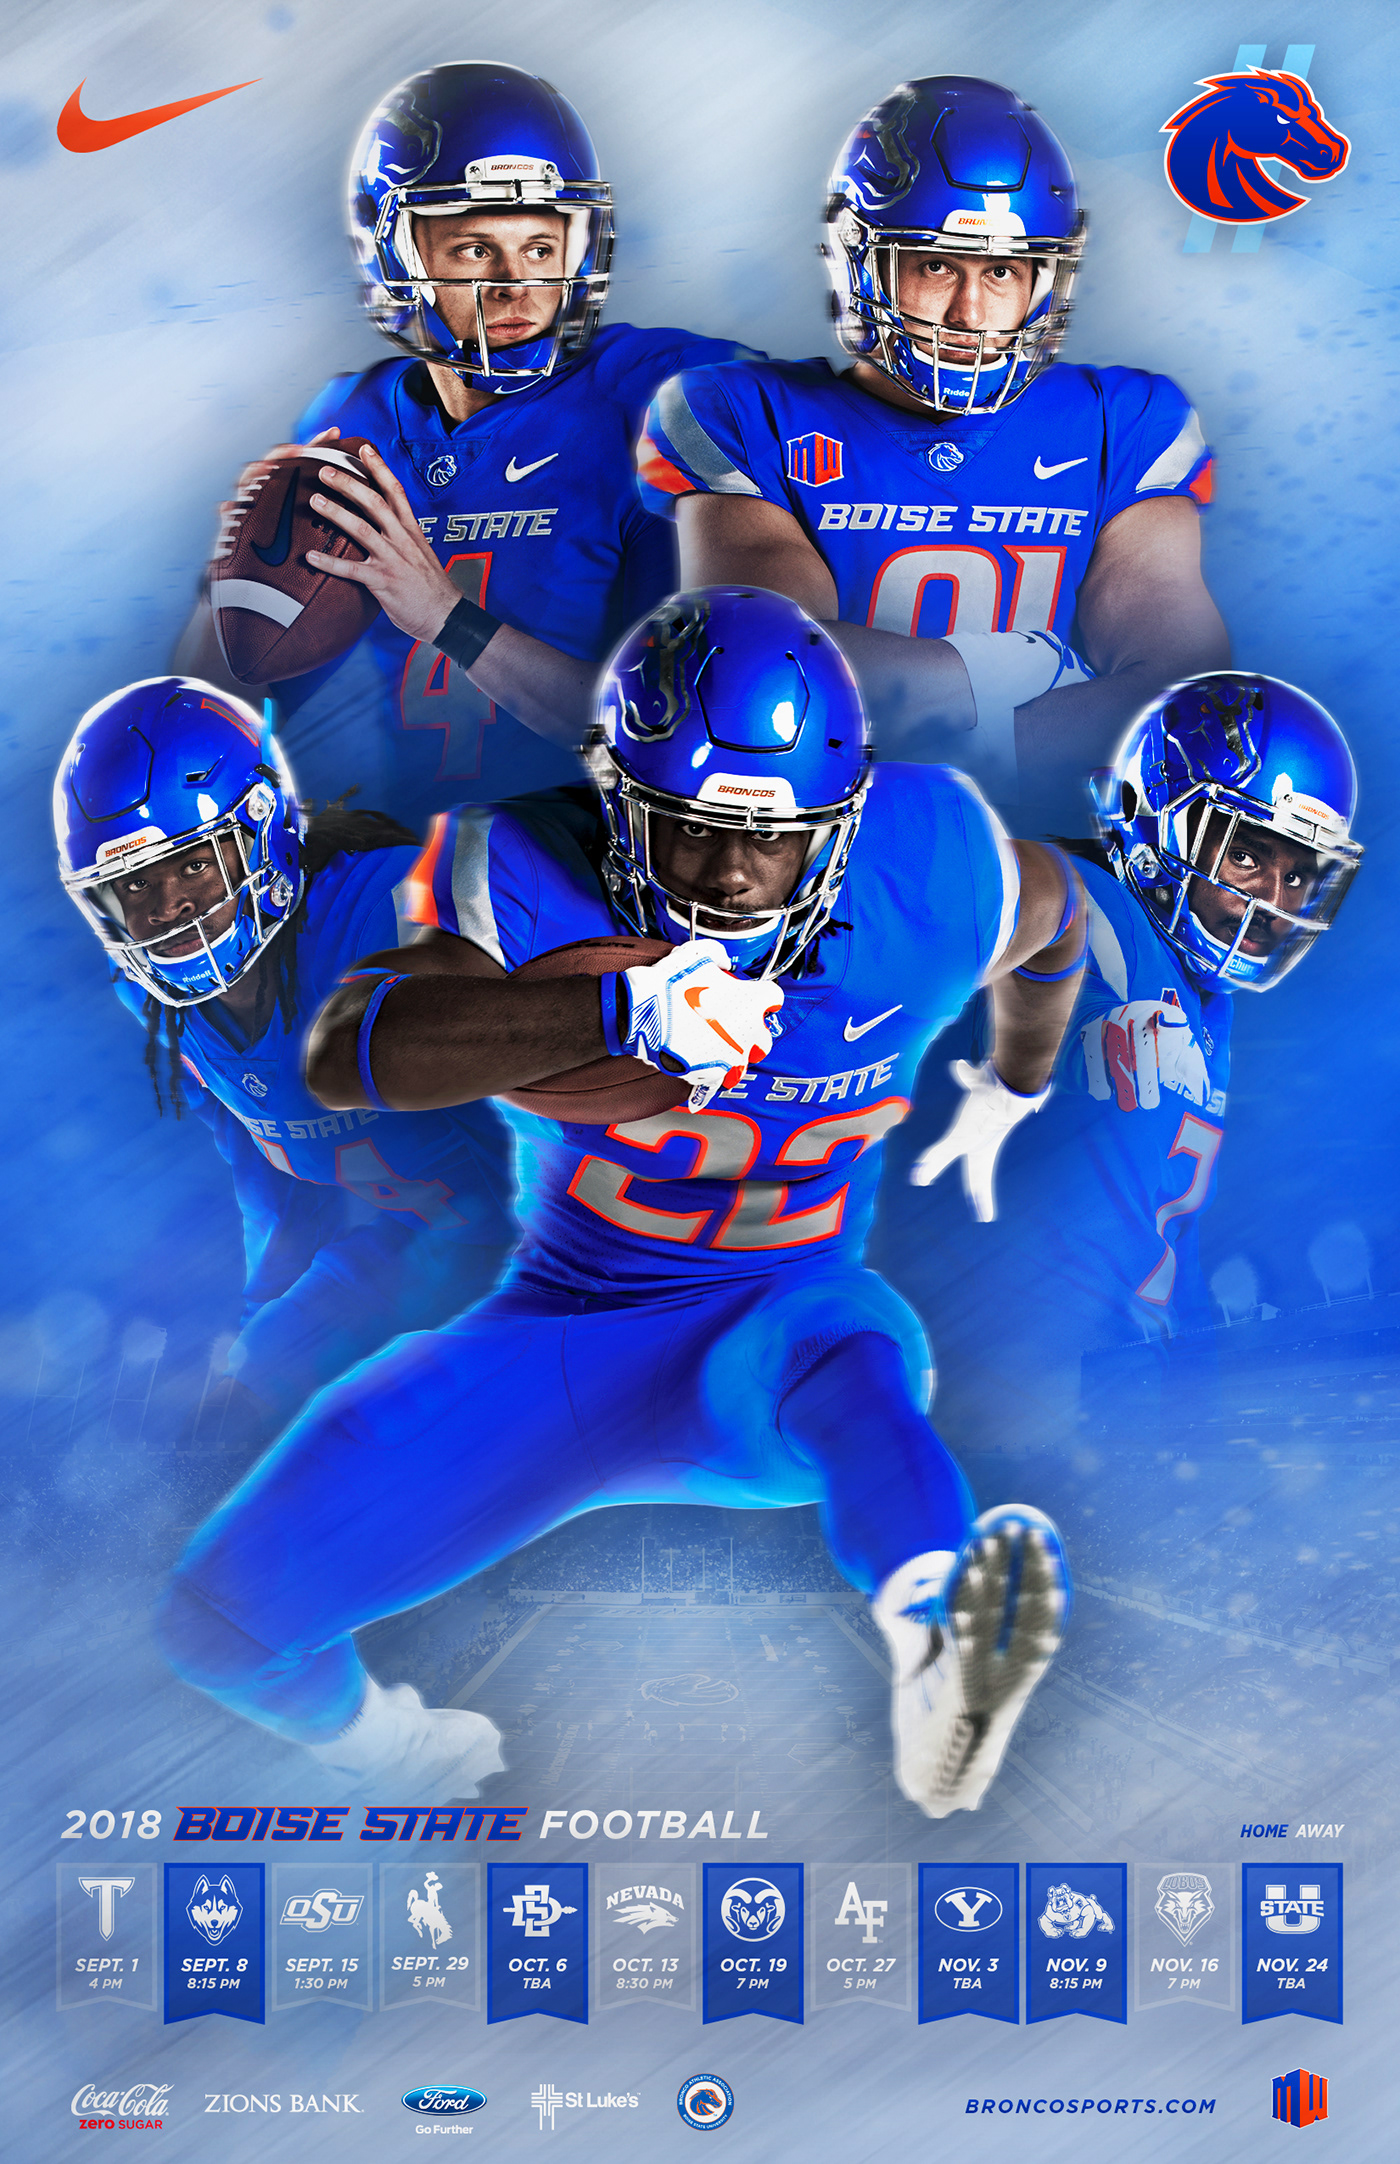 Boise State Football // 2018 Schedule Poster on Behance